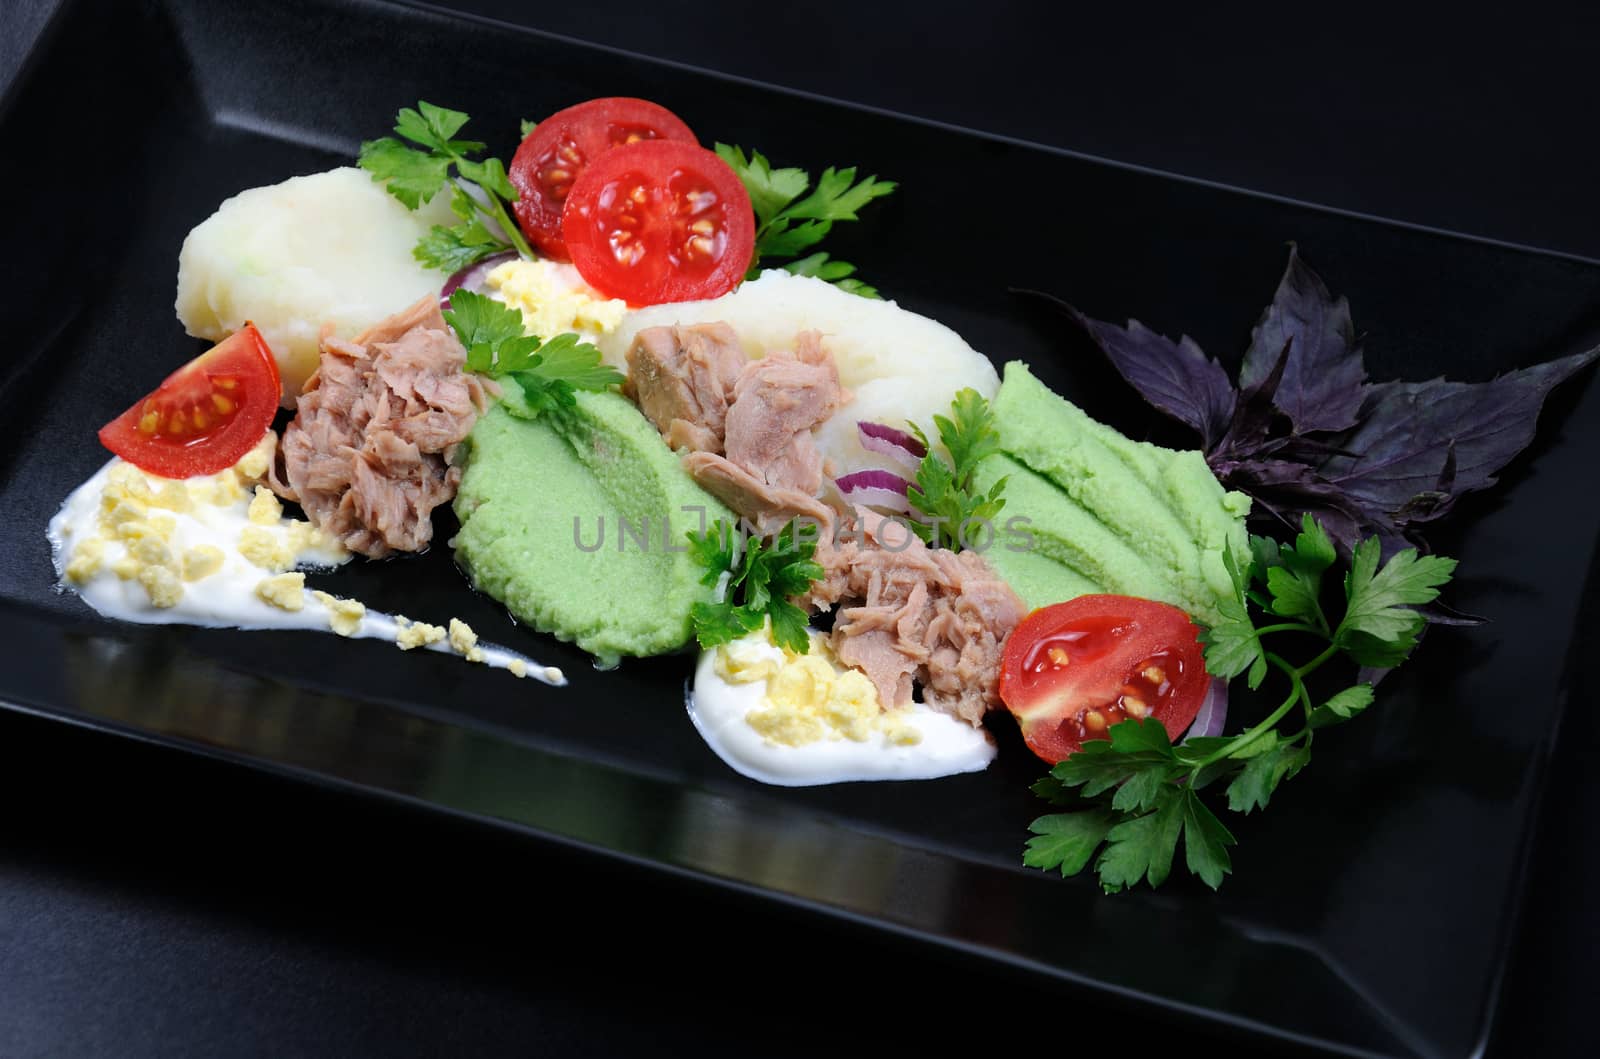 Canned tuna with garnish of mashed potatoes with avocado.